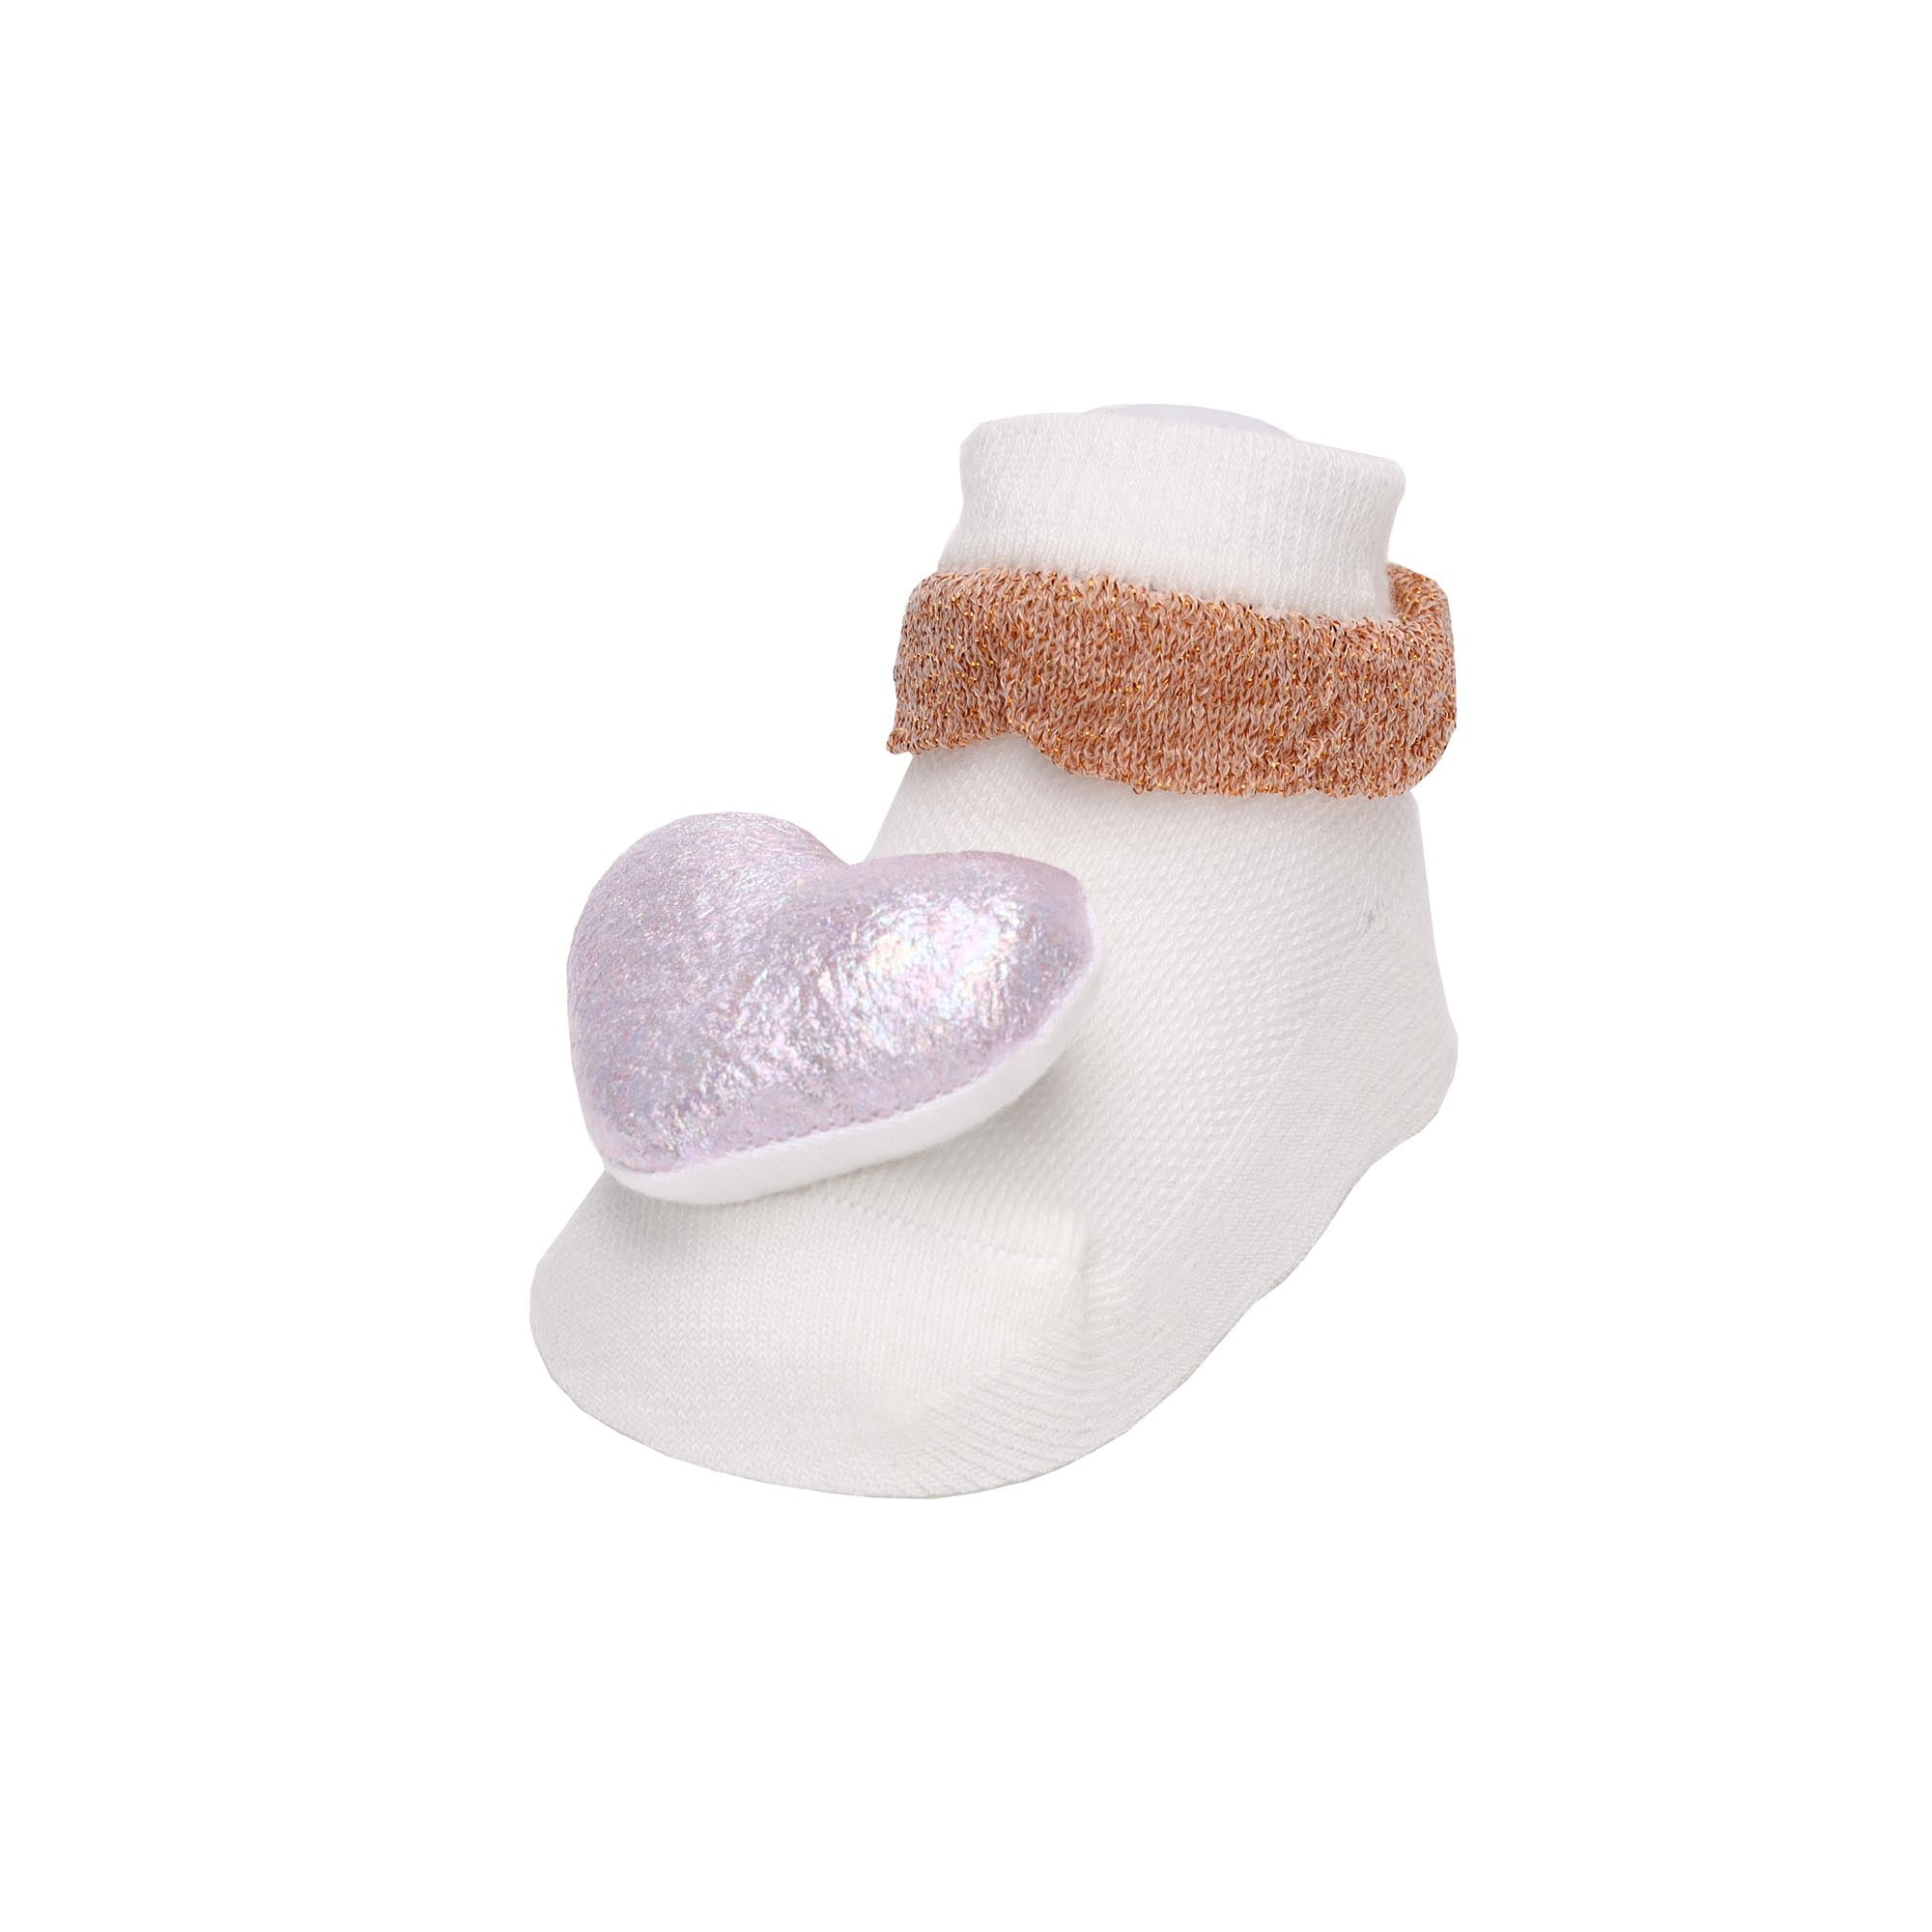 Creamy Starry Hearts 3D Socks- 2 Pack (0-12 Months)